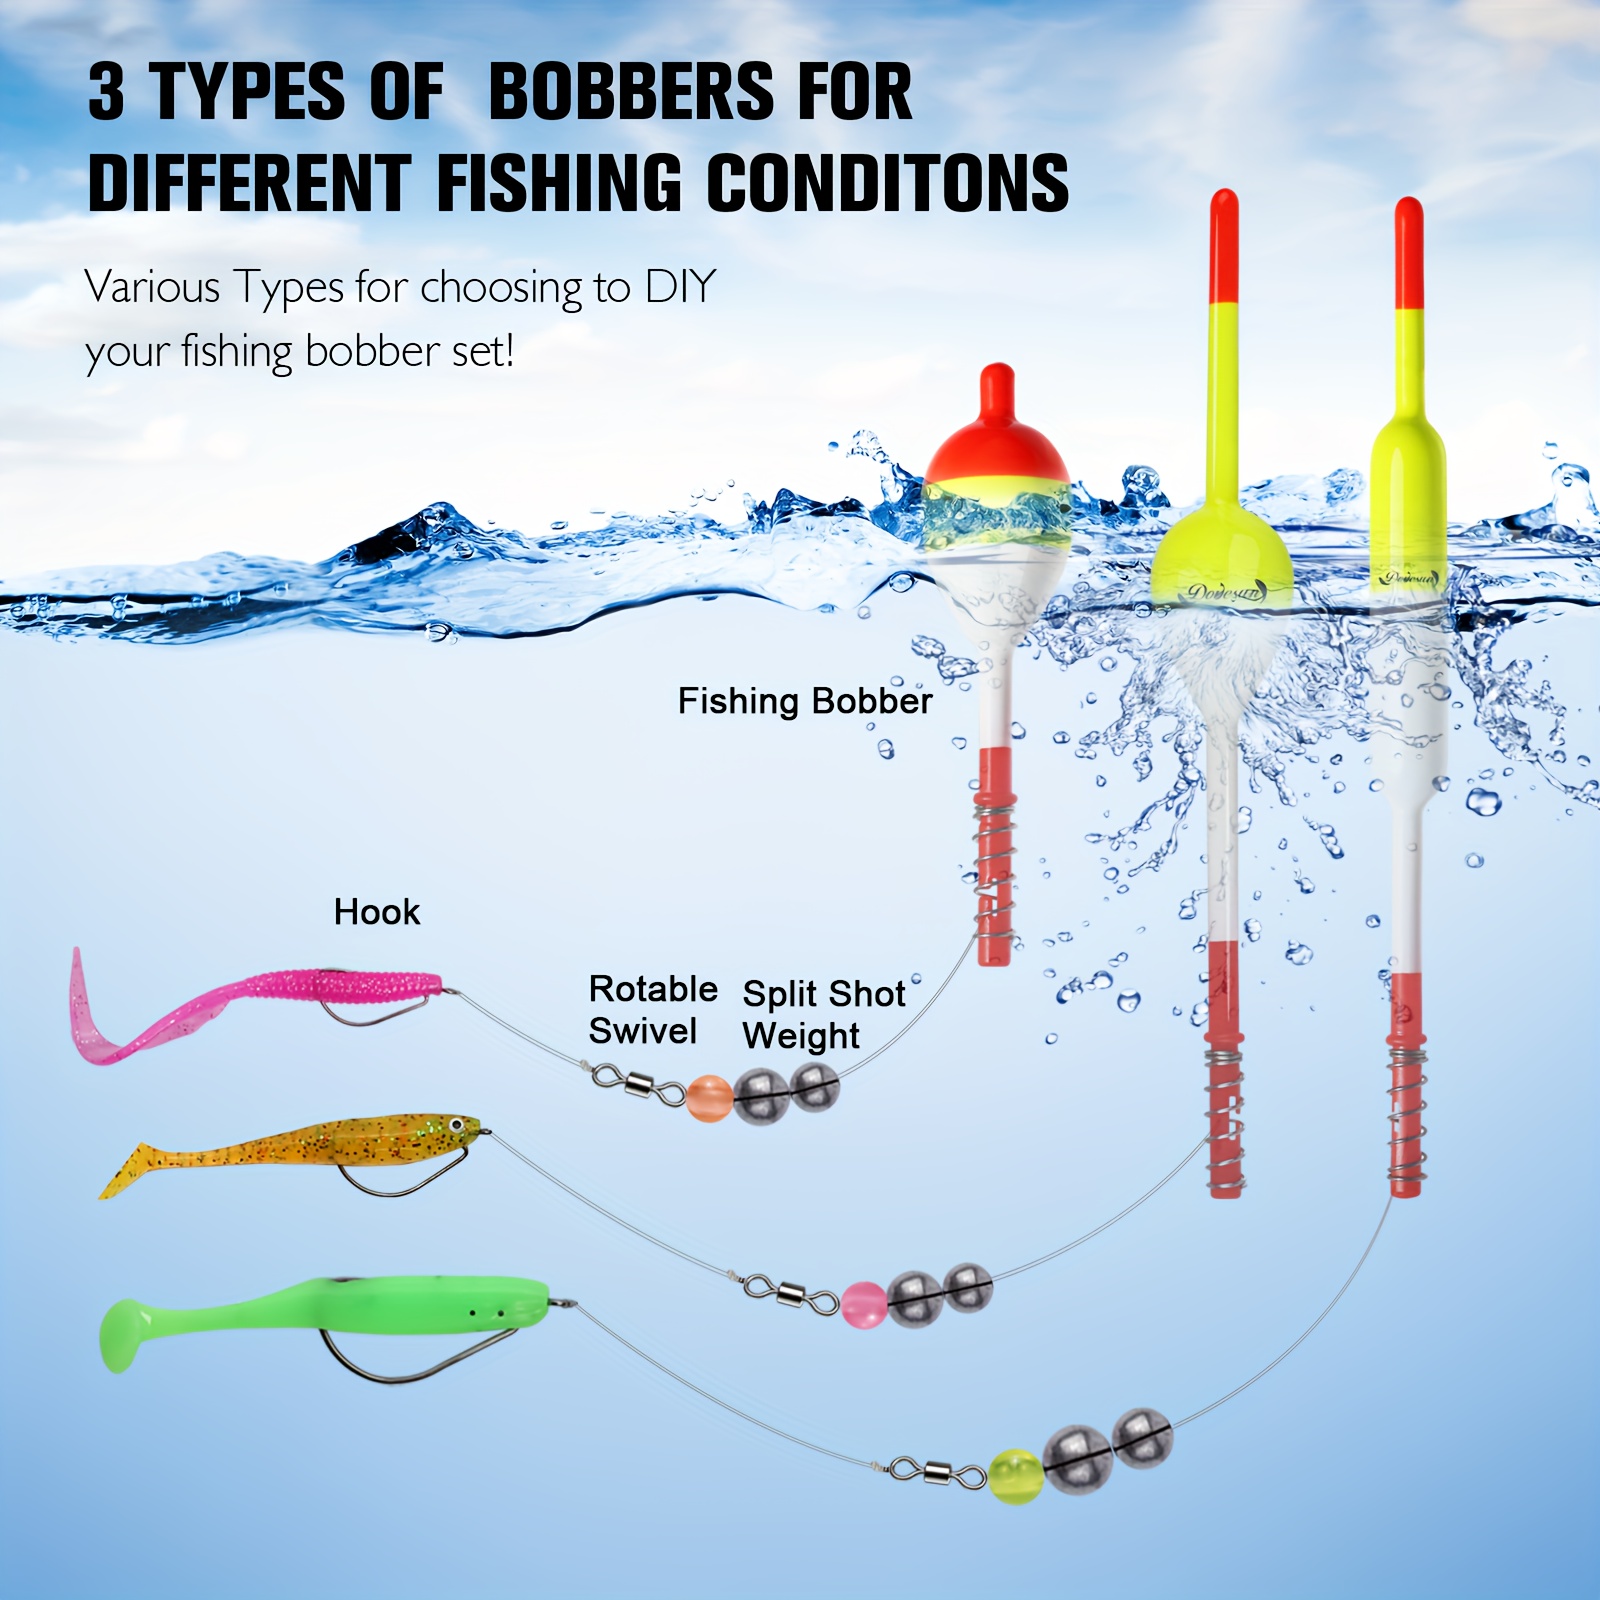 10 Types Of Fishing Bobbers (Differences, Pics, Methods)